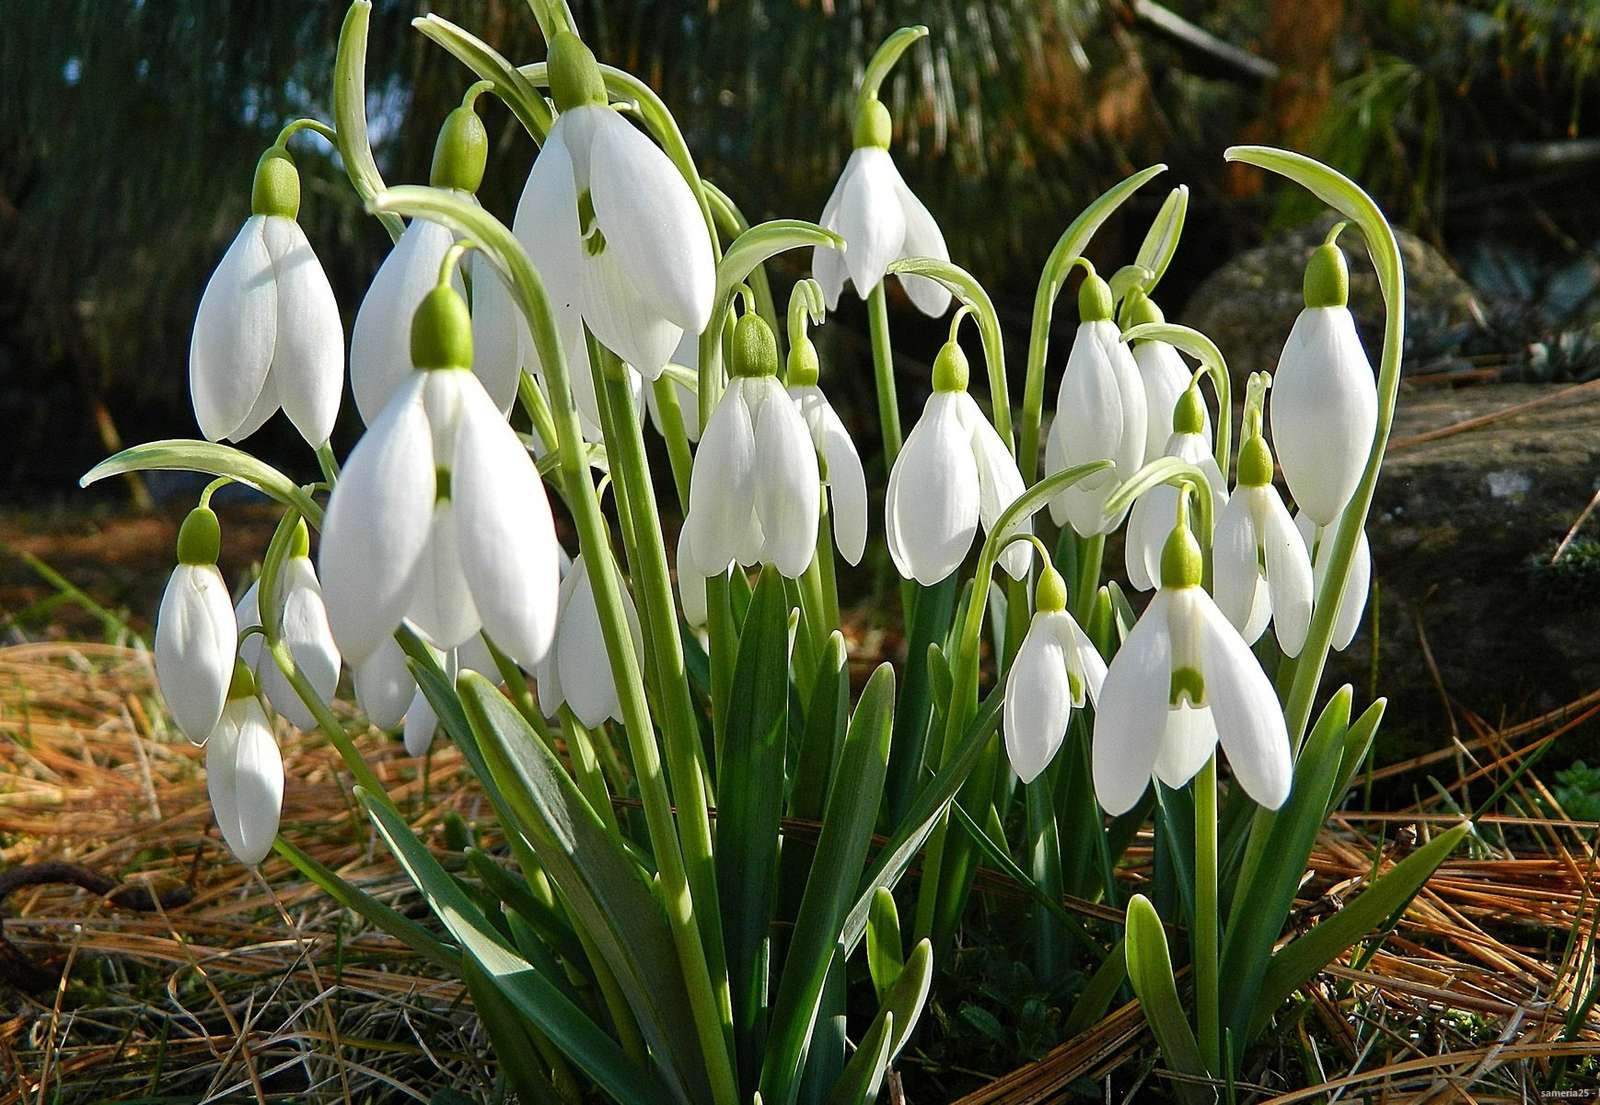 Snowdrops jigsaw puzzle online